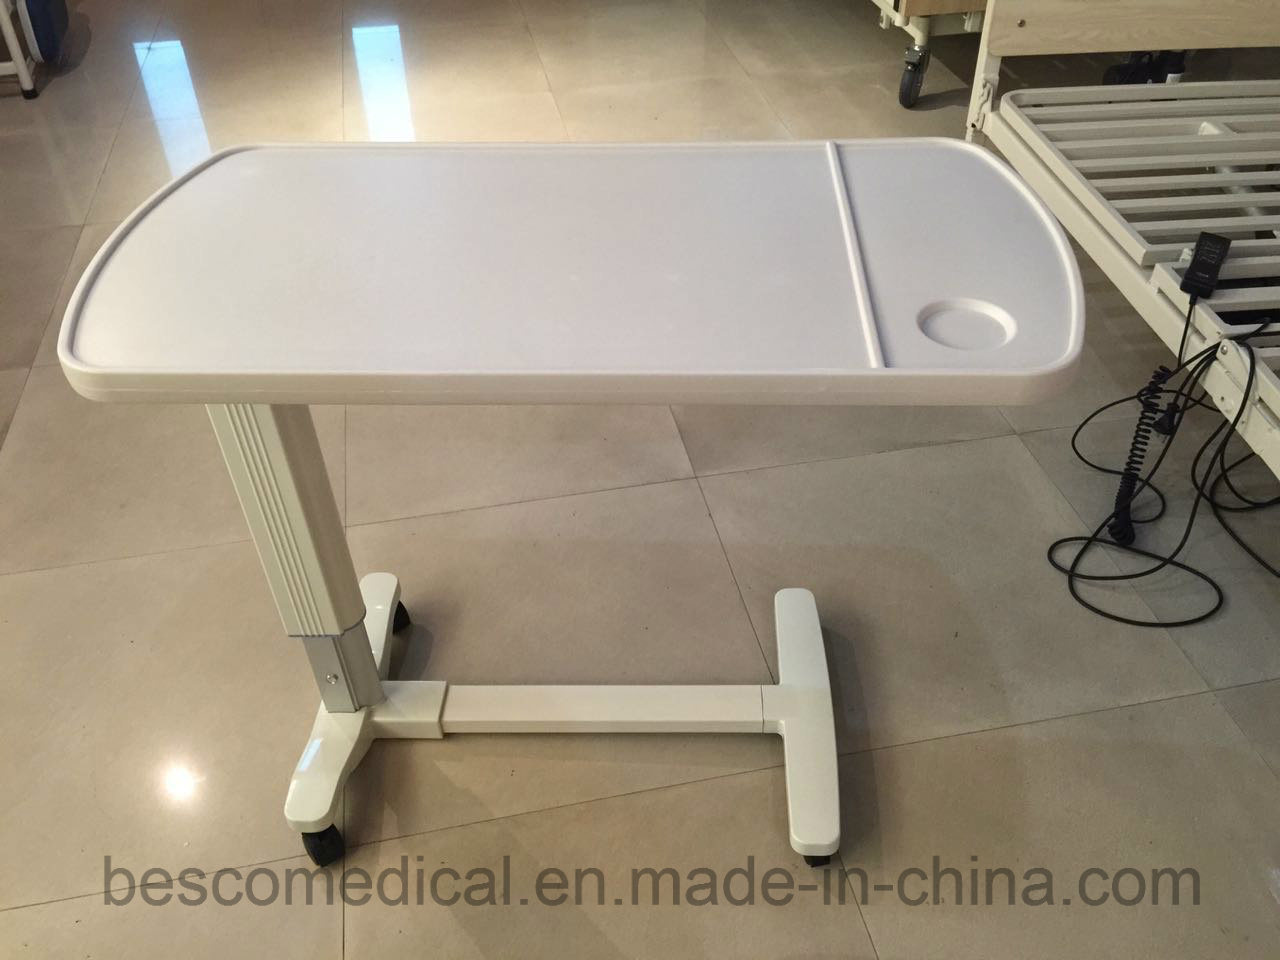 Luxurious ABS Over Bed Table (BES-HB111A)